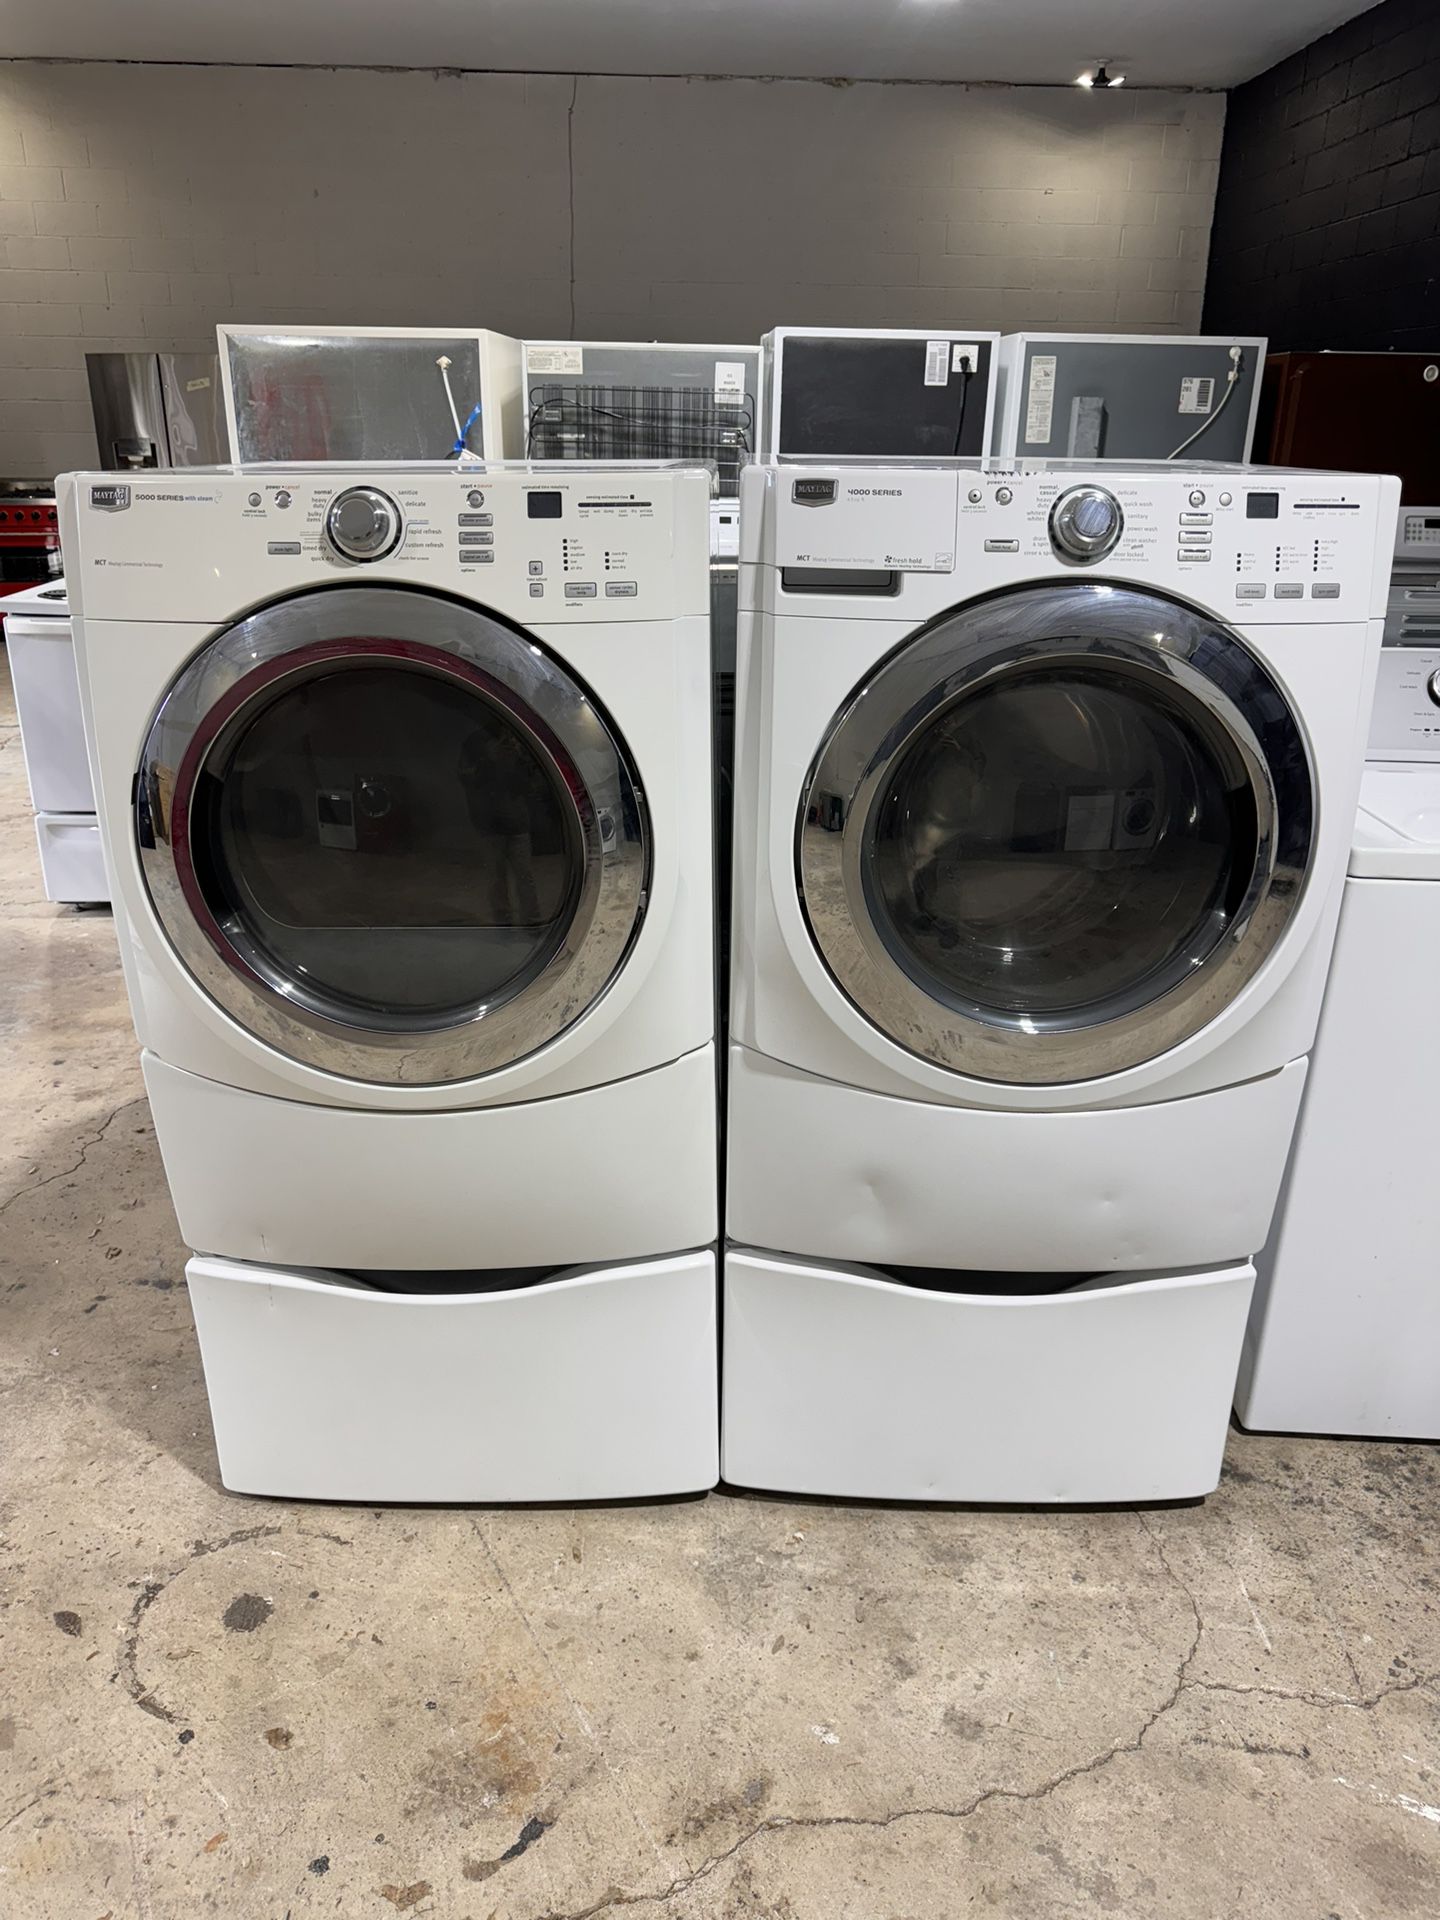 Maytag Washer And Dryer On Pedestals 